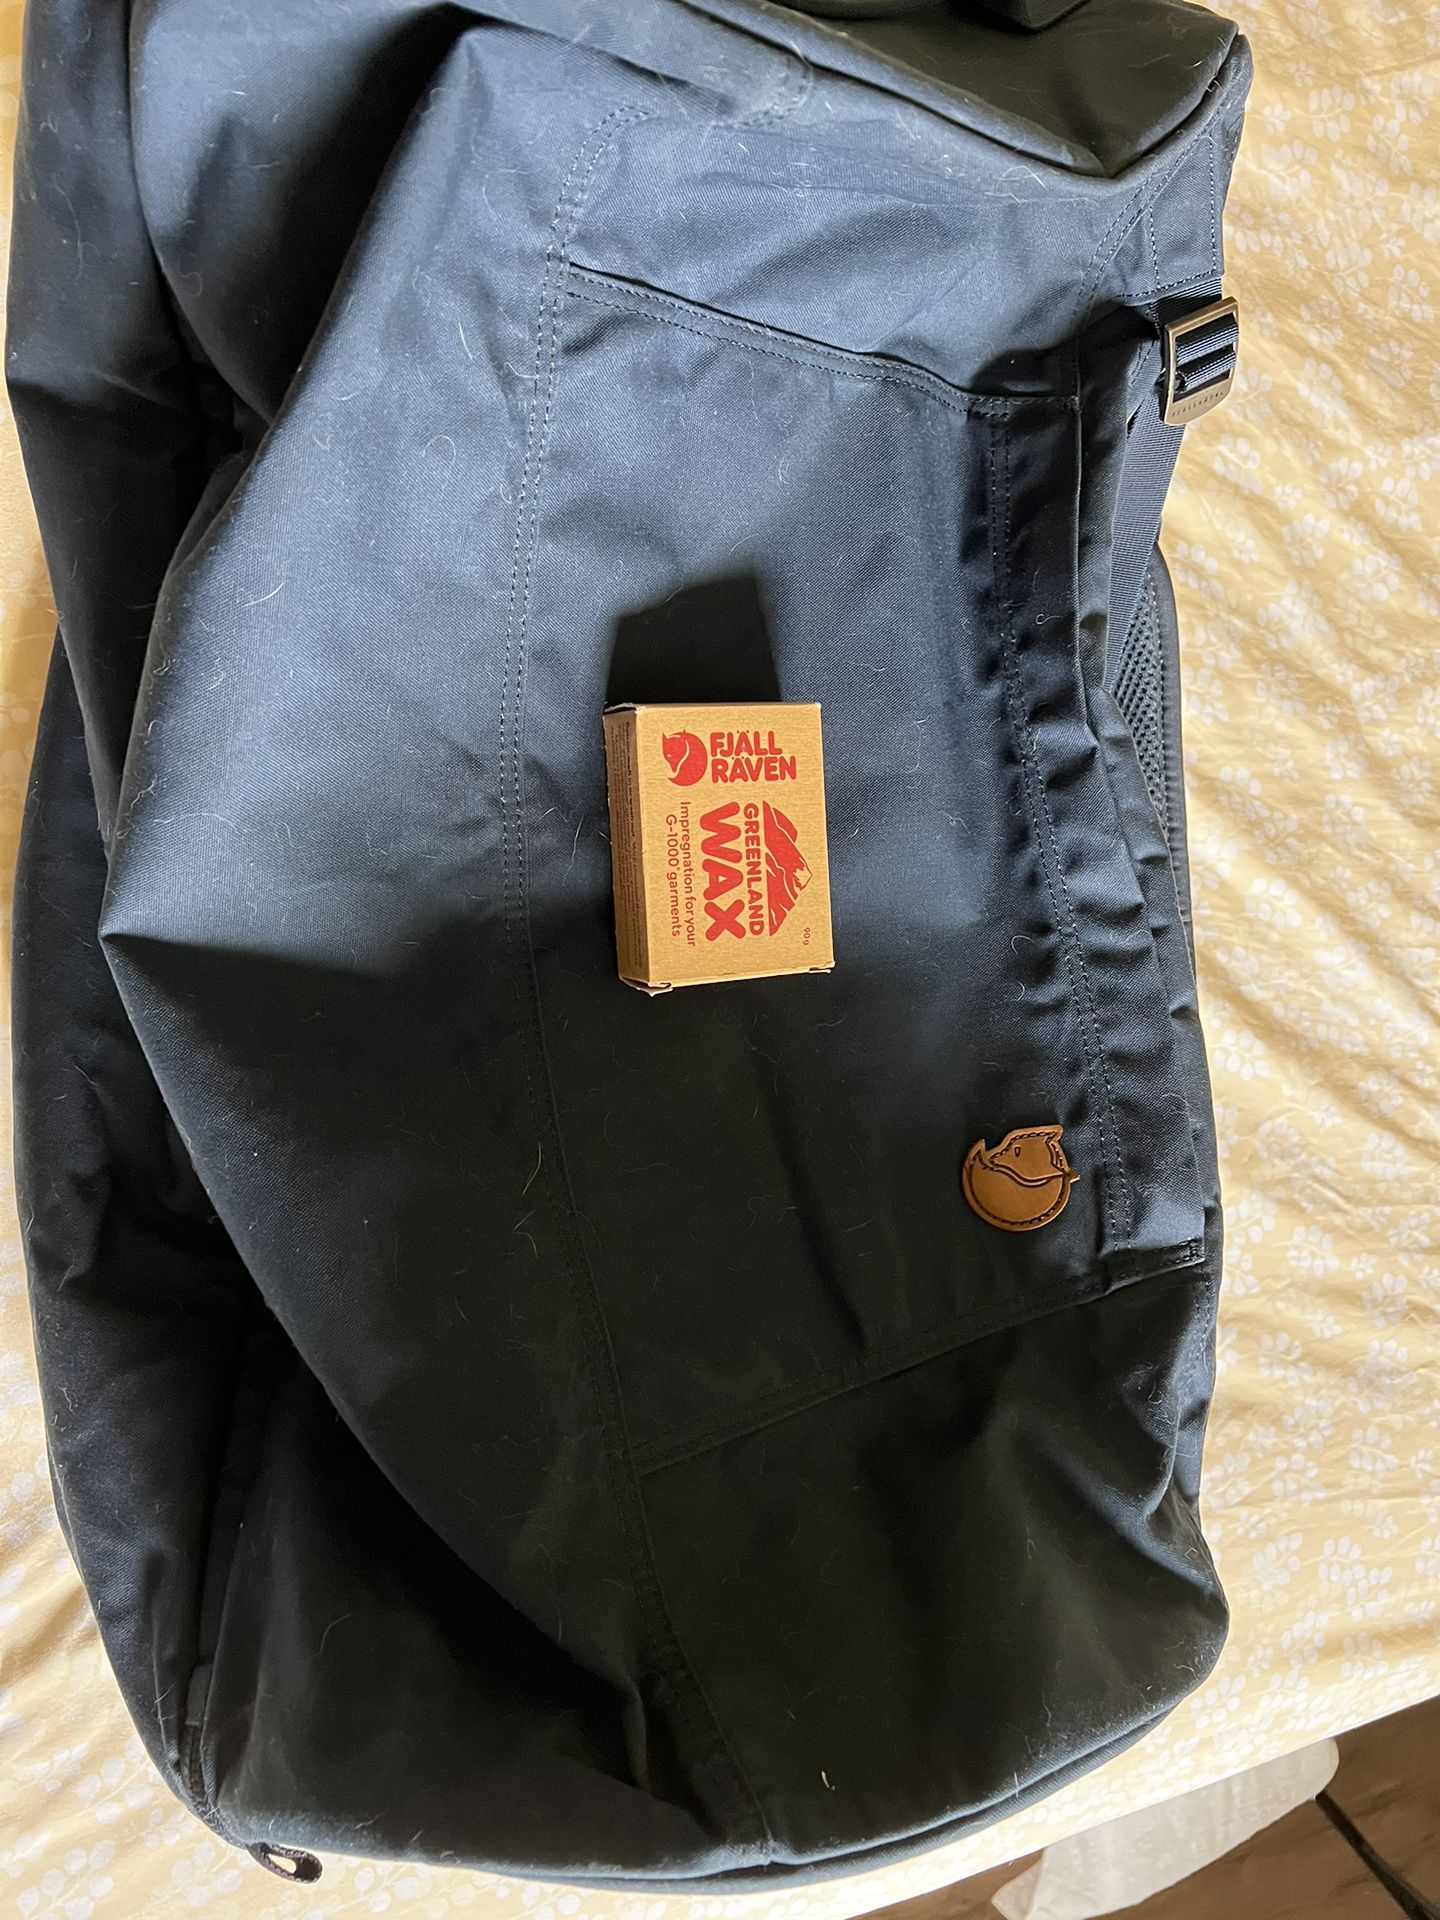 Waxing your G-1000 Clothing and Accessories - My Fox Bag